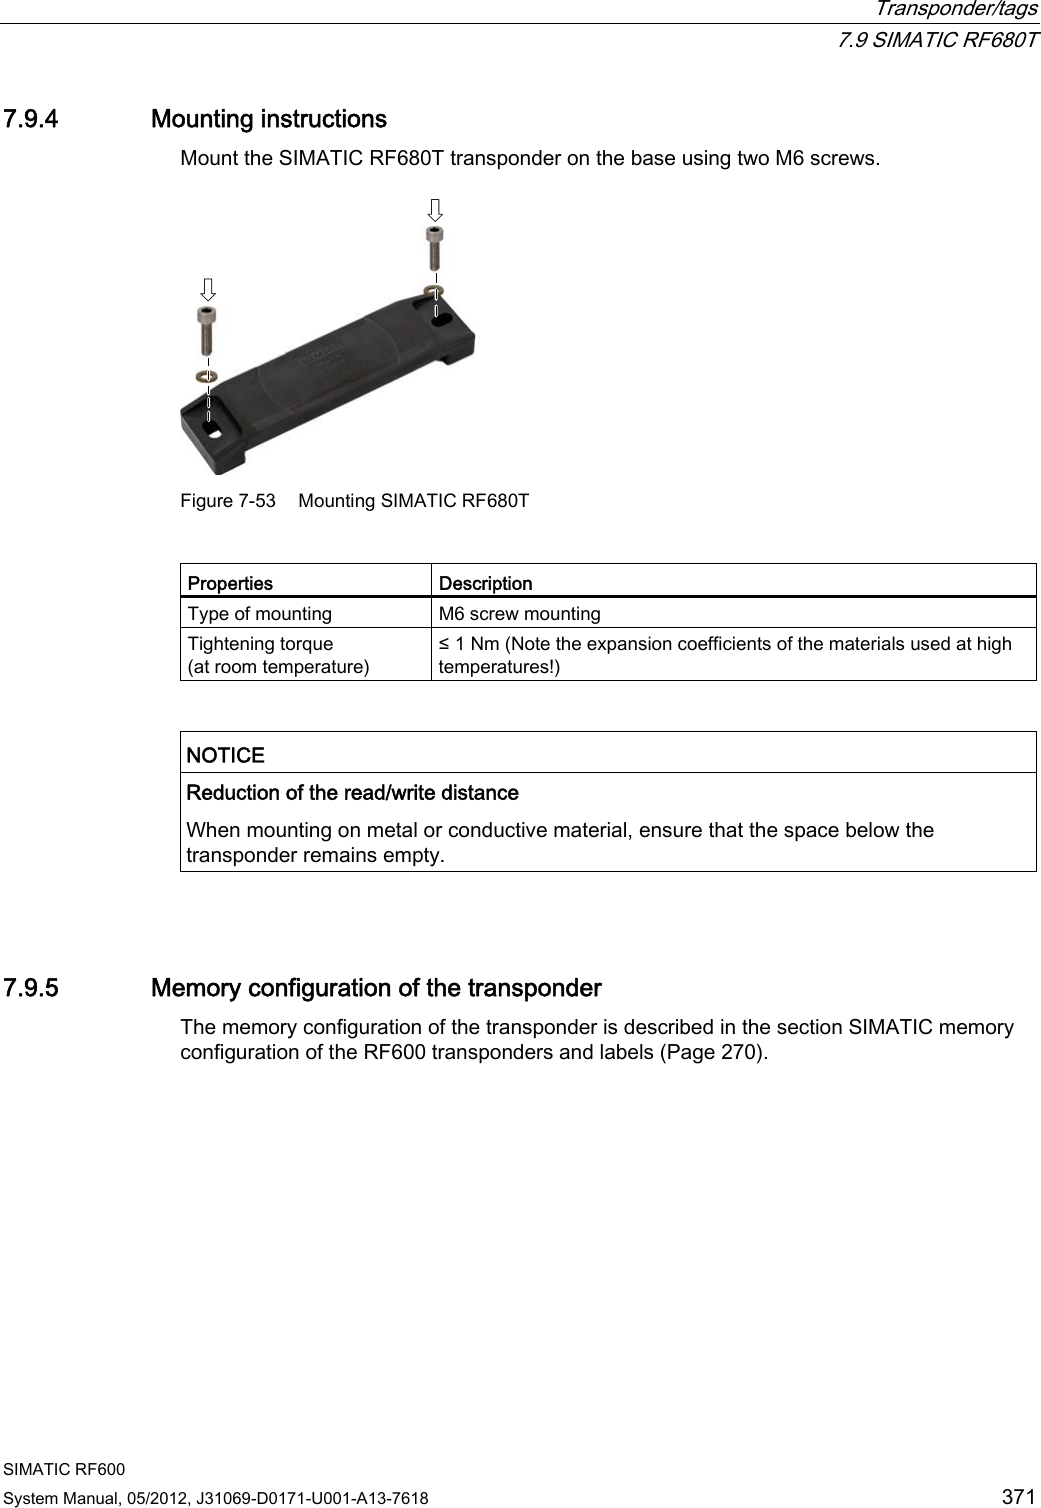  Transponder/tags  7.9 SIMATIC RF680T SIMATIC RF600 System Manual, 05/2012, J31069-D0171-U001-A13-7618  371 7.9.4 Mounting instructions Mount the SIMATIC RF680T transponder on the base using two M6 screws.  Figure 7-53  Mounting SIMATIC RF680T  Properties  Description Type of mounting  M6 screw mounting Tightening torque (at room temperature) ≤ 1 Nm (Note the expansion coefficients of the materials used at high temperatures!)   NOTICE  Reduction of the read/write distance  When mounting on metal or conductive material, ensure that the space below the transponder remains empty.   7.9.5 Memory configuration of the transponder The memory configuration of the transponder is described in the section SIMATIC memory configuration of the RF600 transponders and labels (Page 270). 